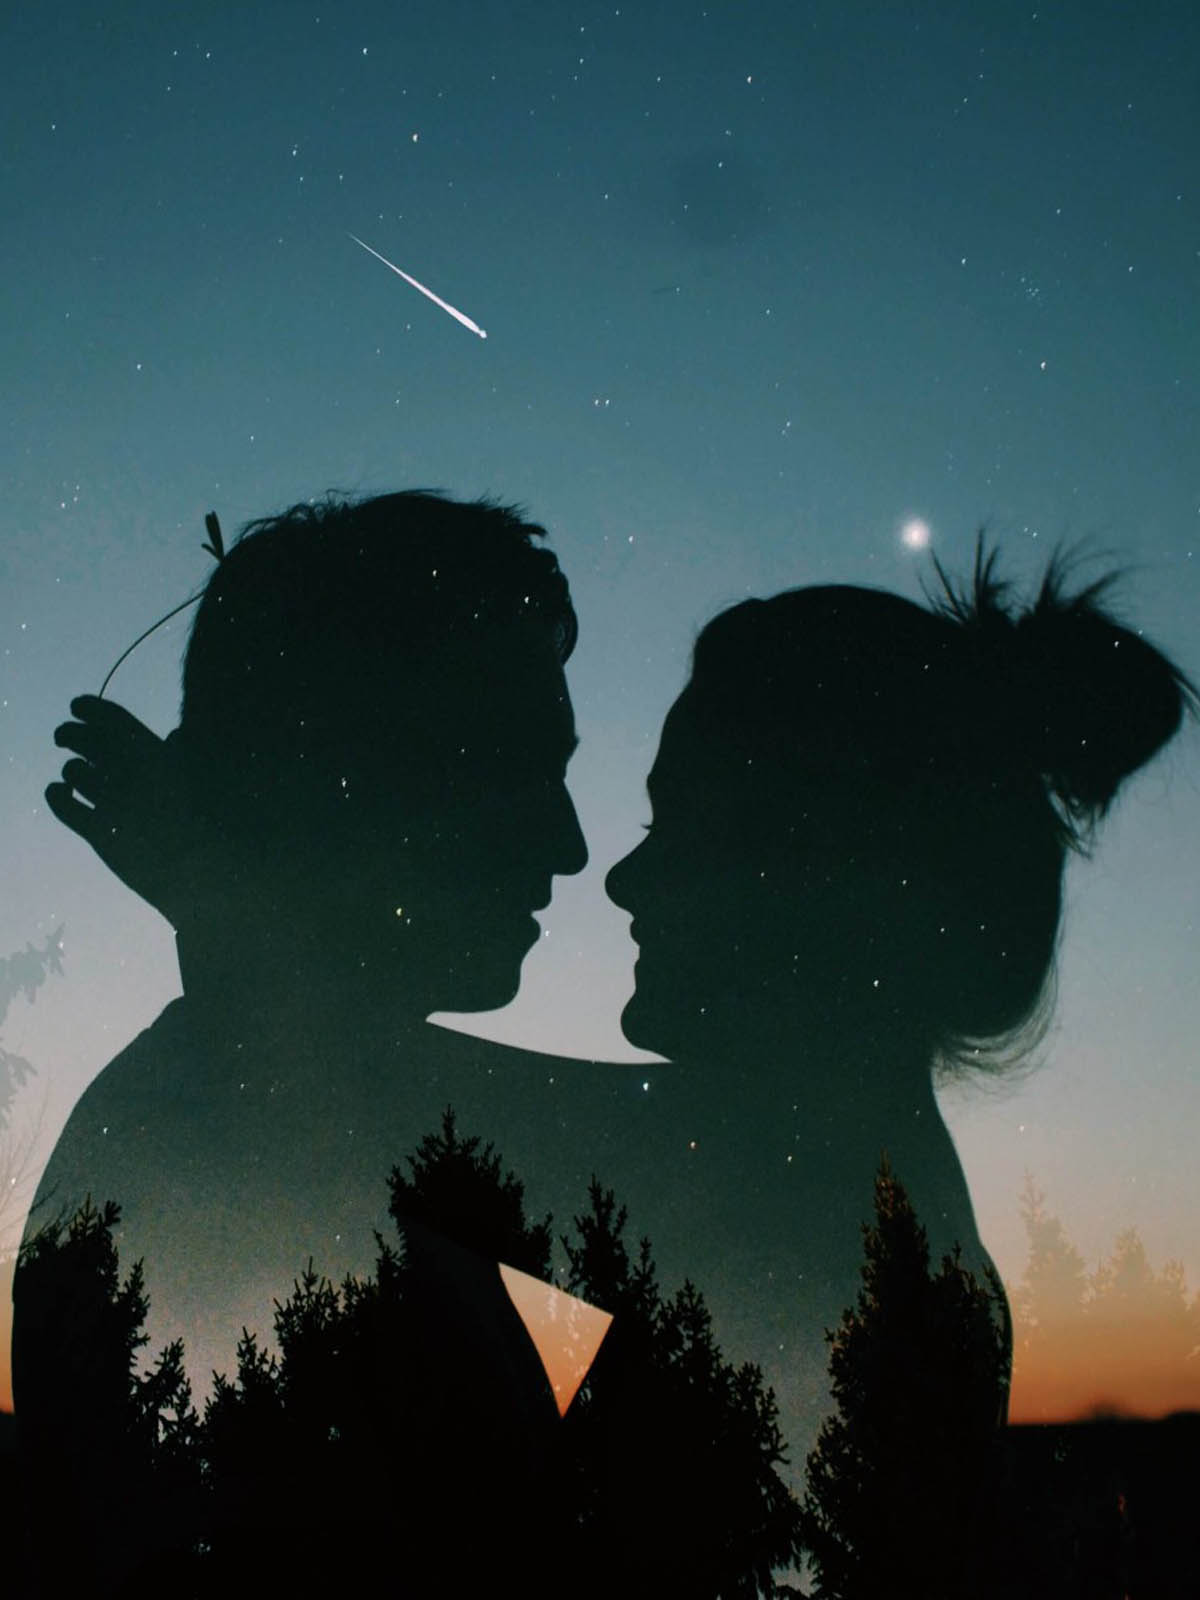 Couple Under The Stars - HD Wallpaper 